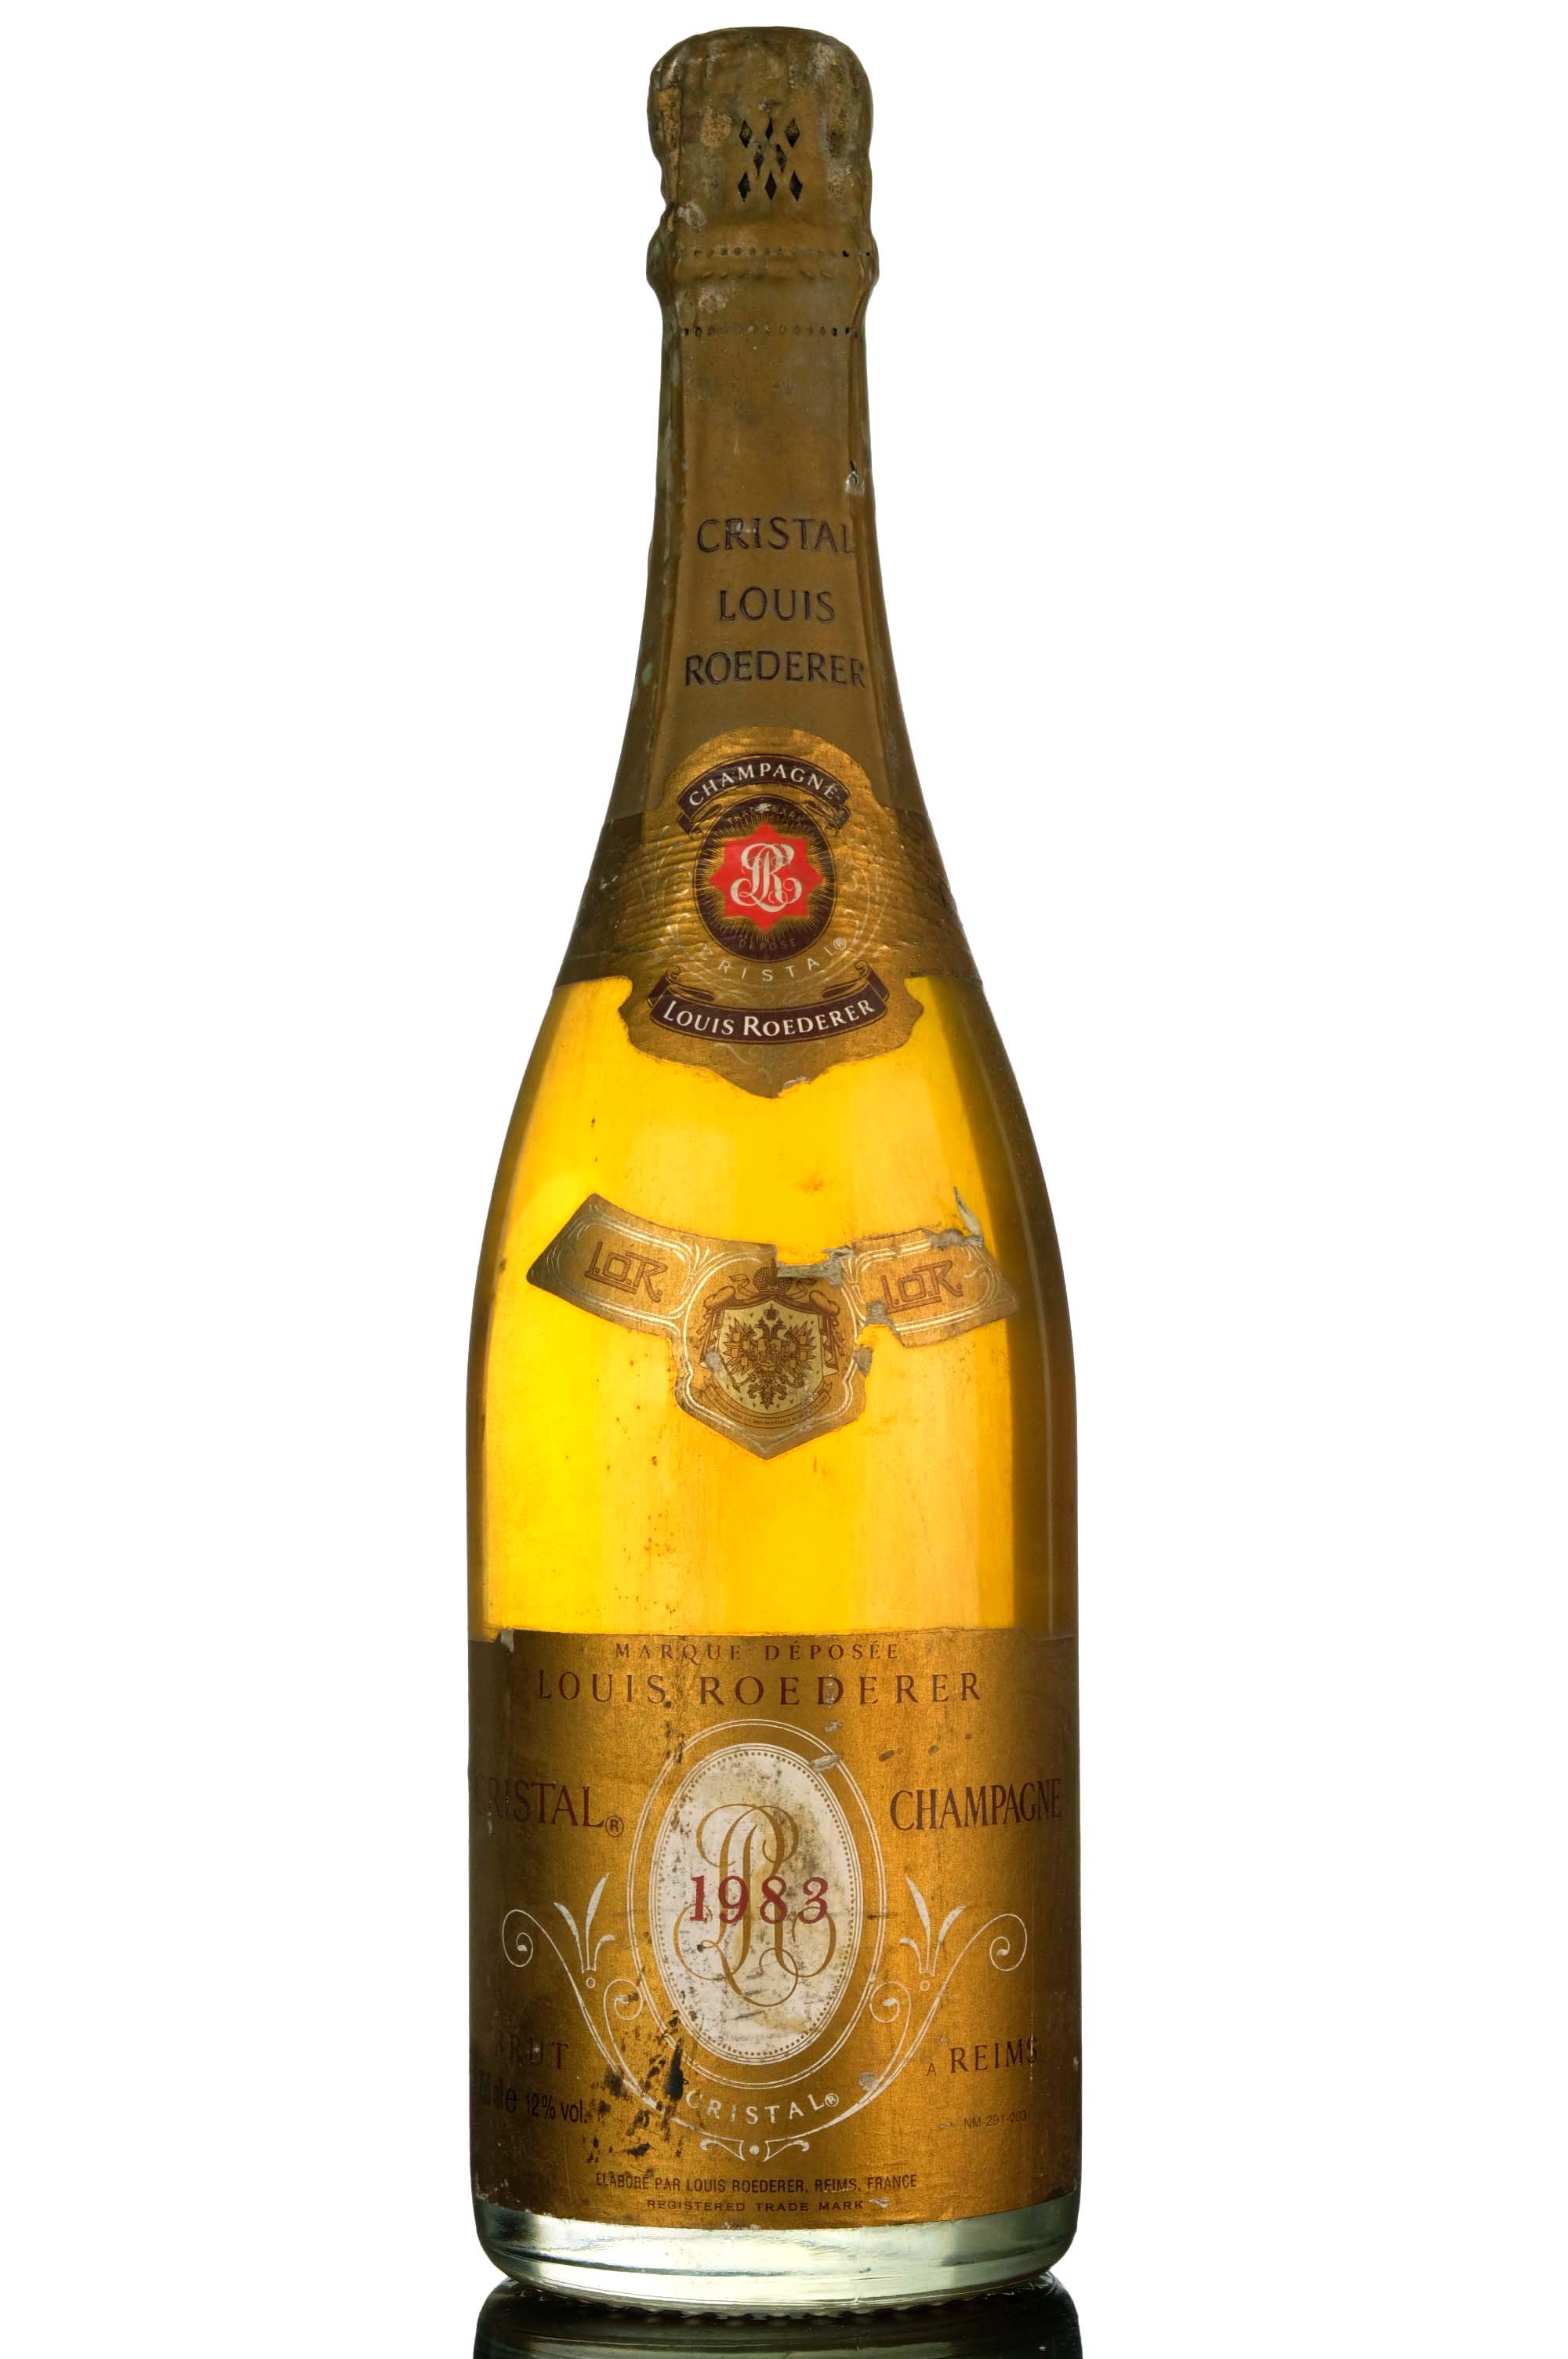 Louis Roederer 1983 Cristal Champagne